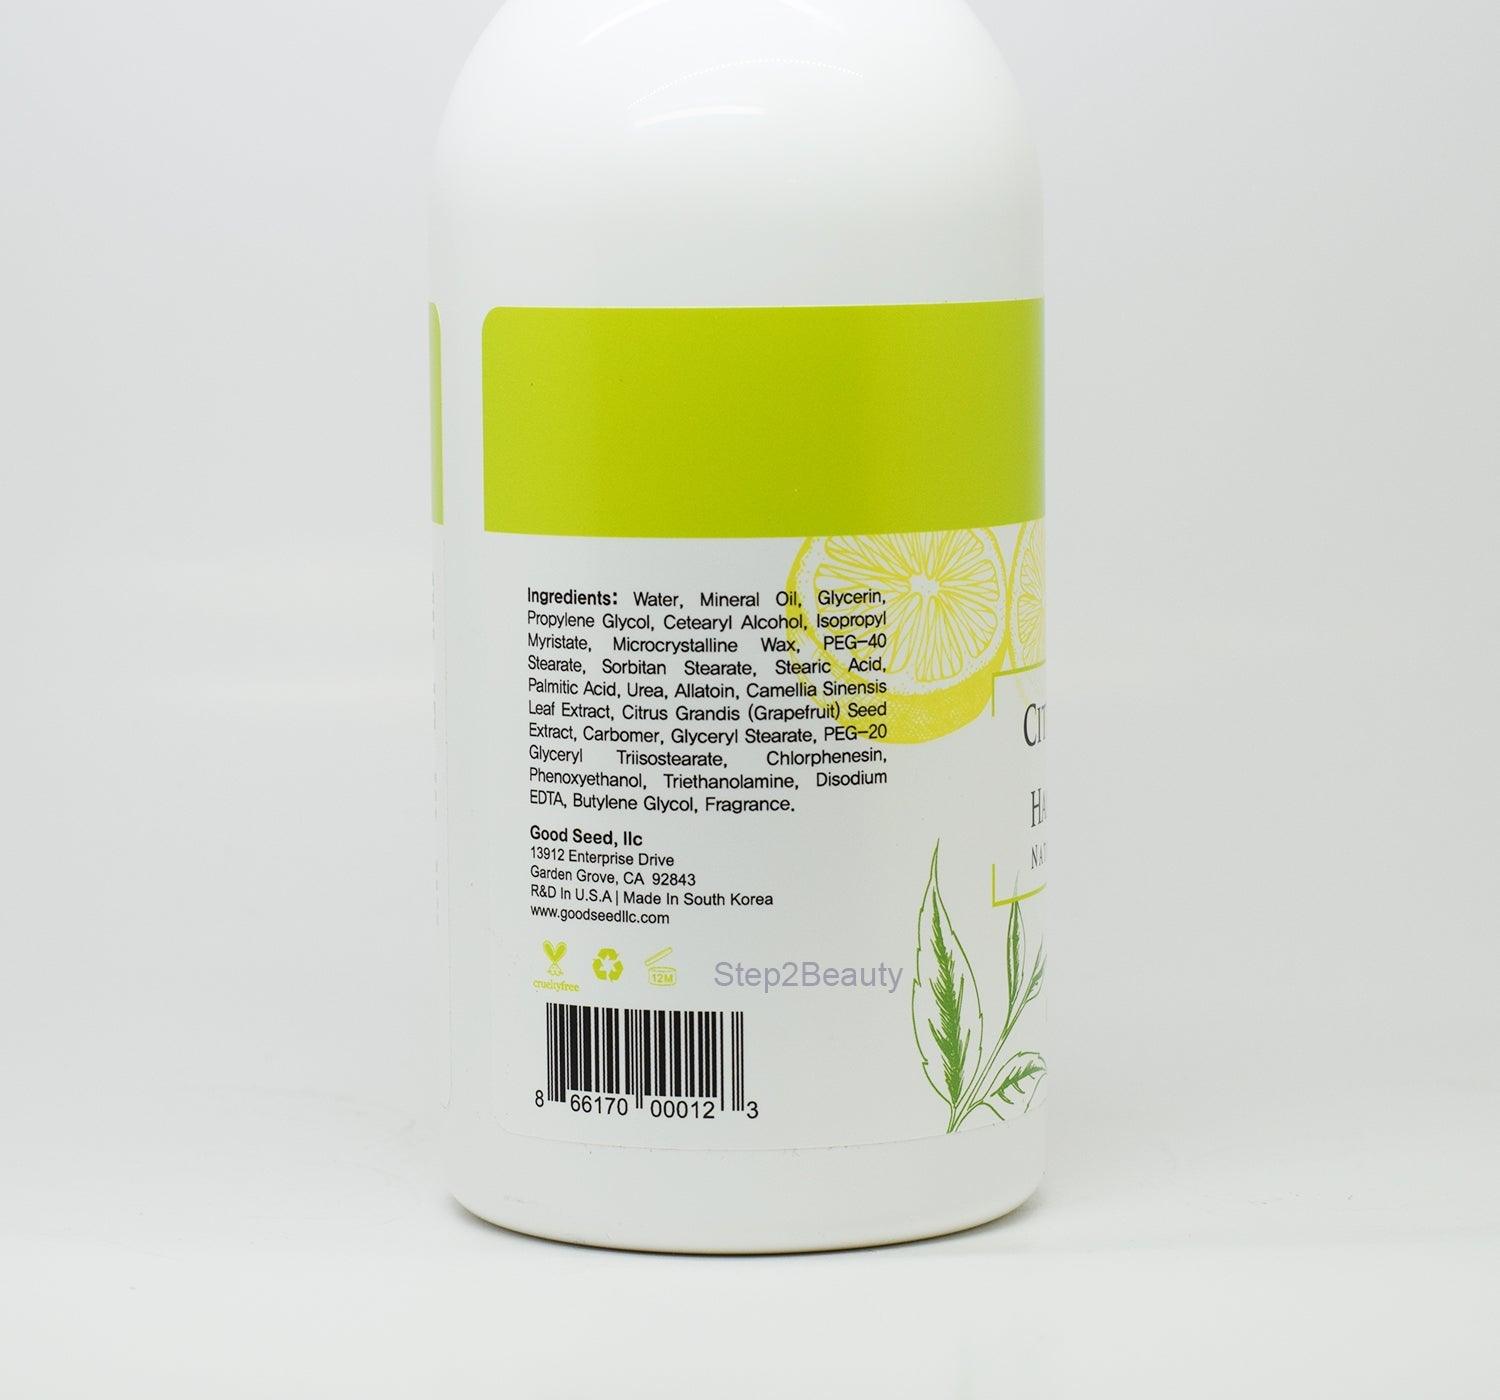 Good Seed Hand and Body Lotion 30 Oz - CITRUS & GREEN TEA